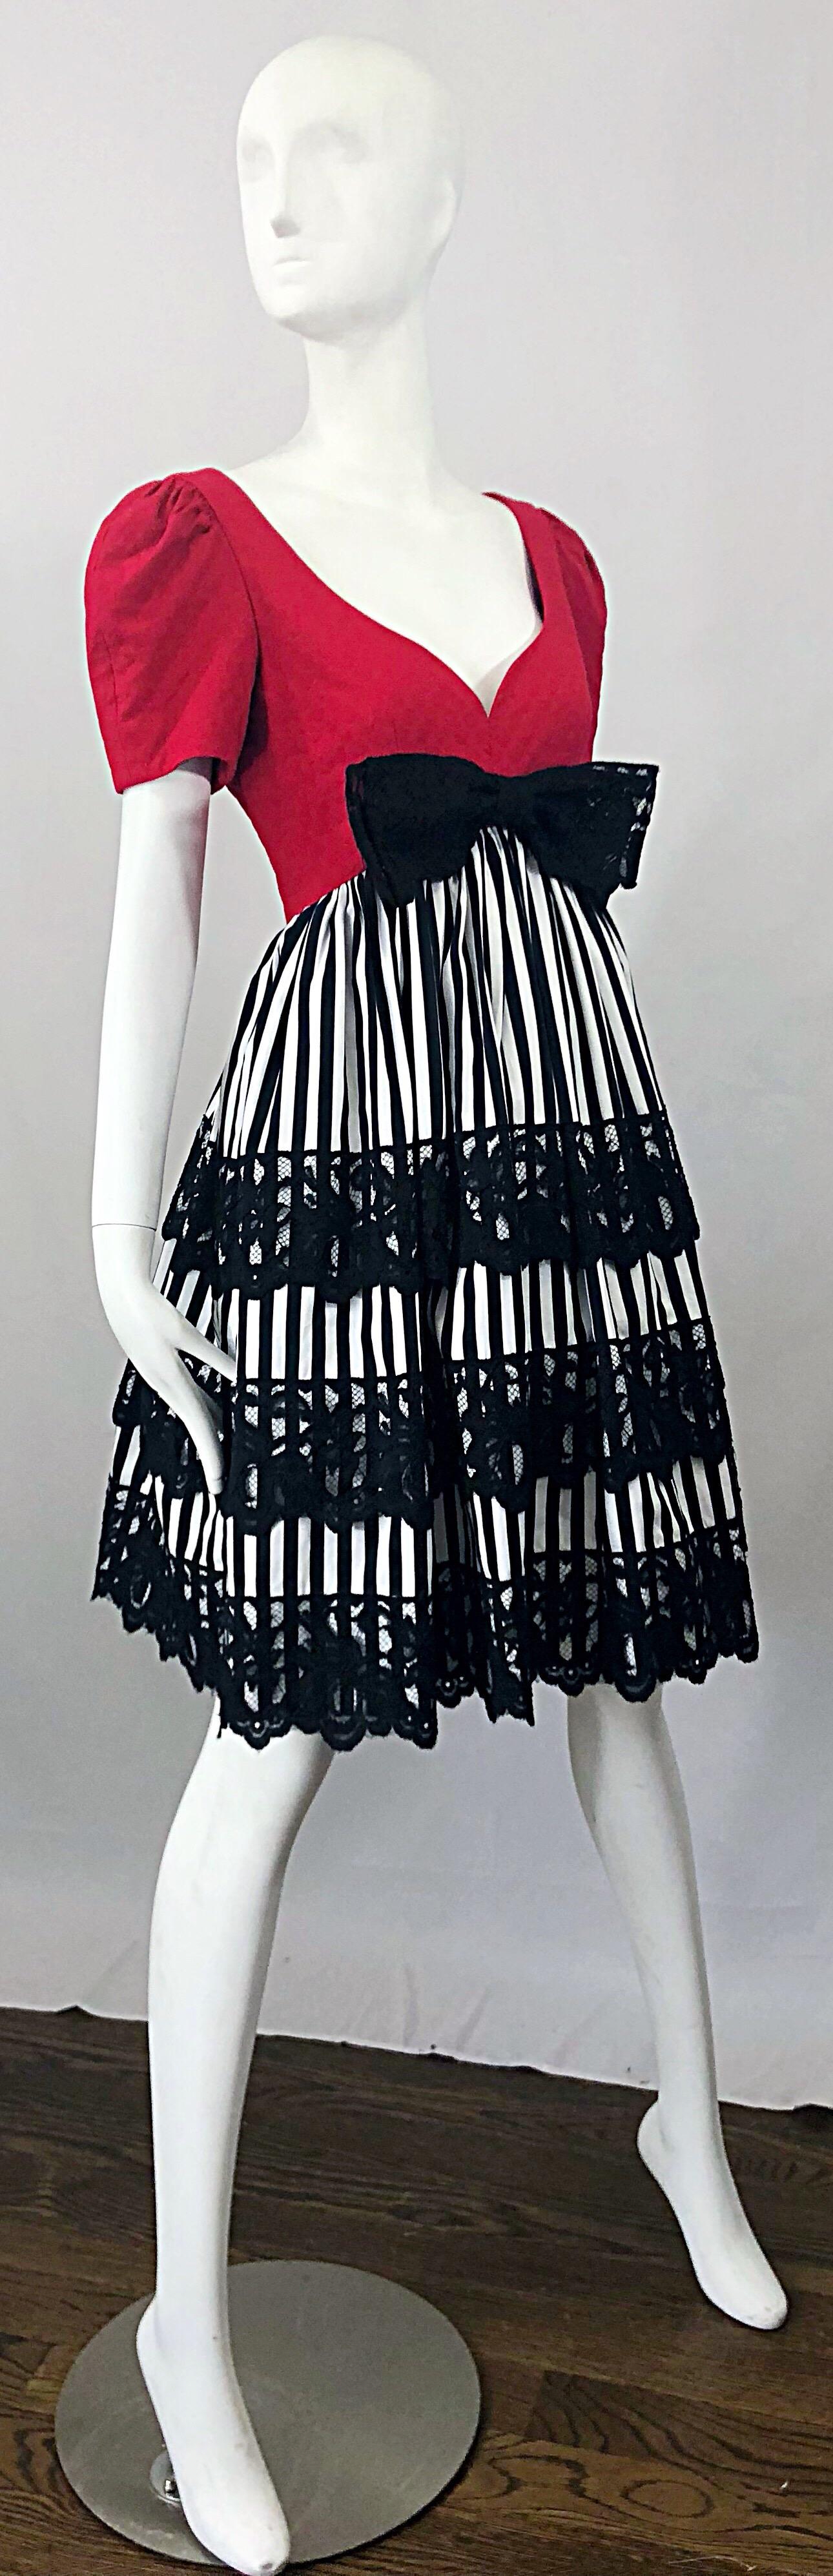 Vintage Adele Simpson 1980s Red Black White Fit n' Flare Empire Bow Lace Dress 4